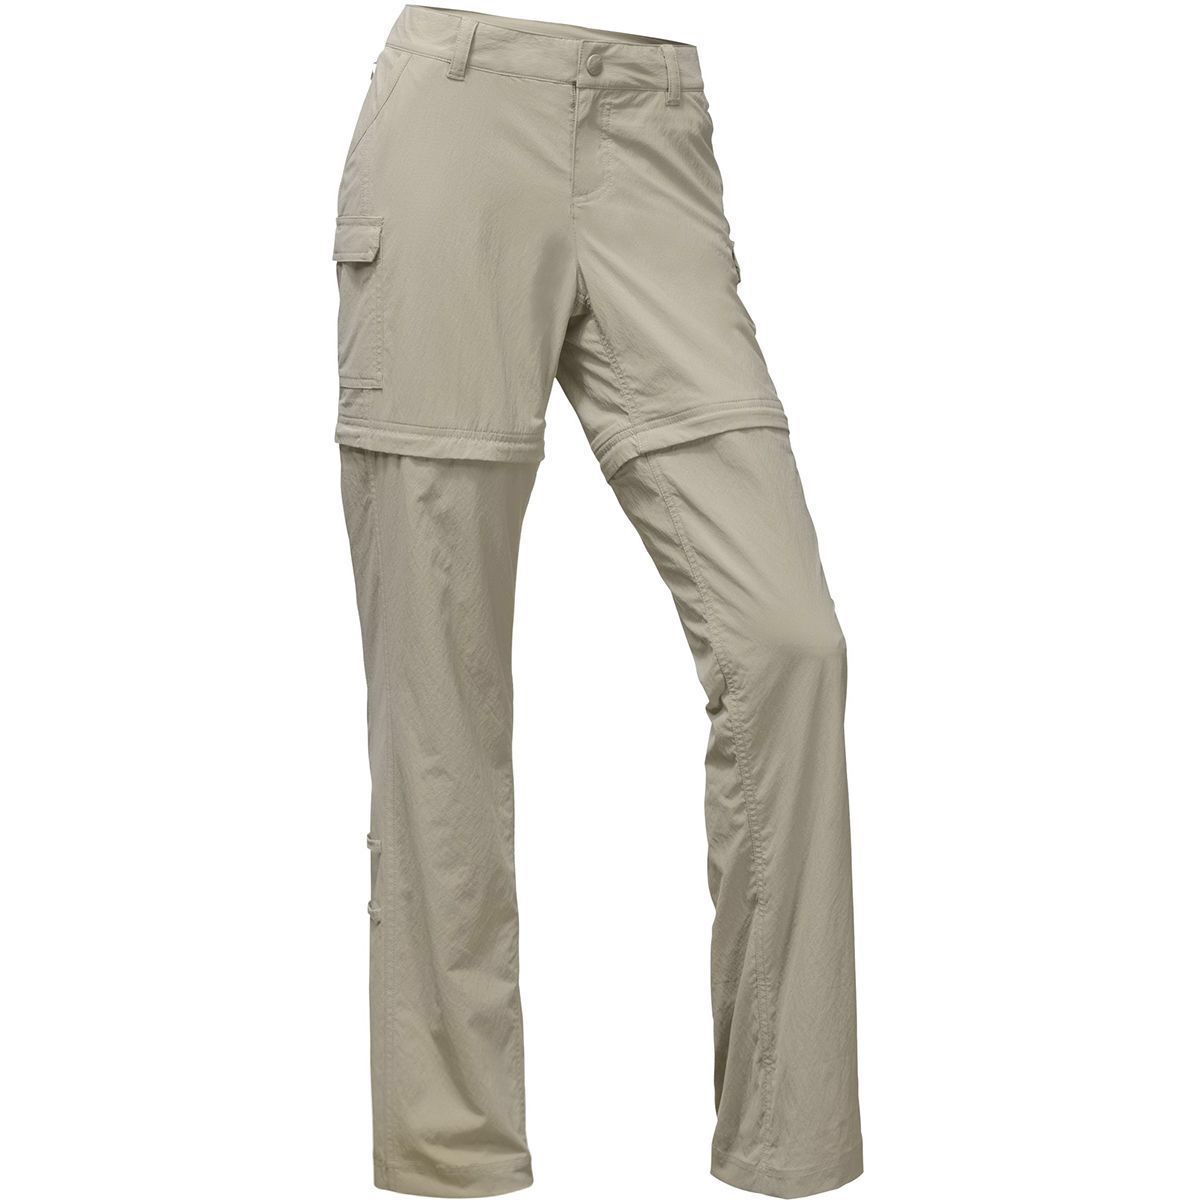 North Face Woman Hiking pants size 4